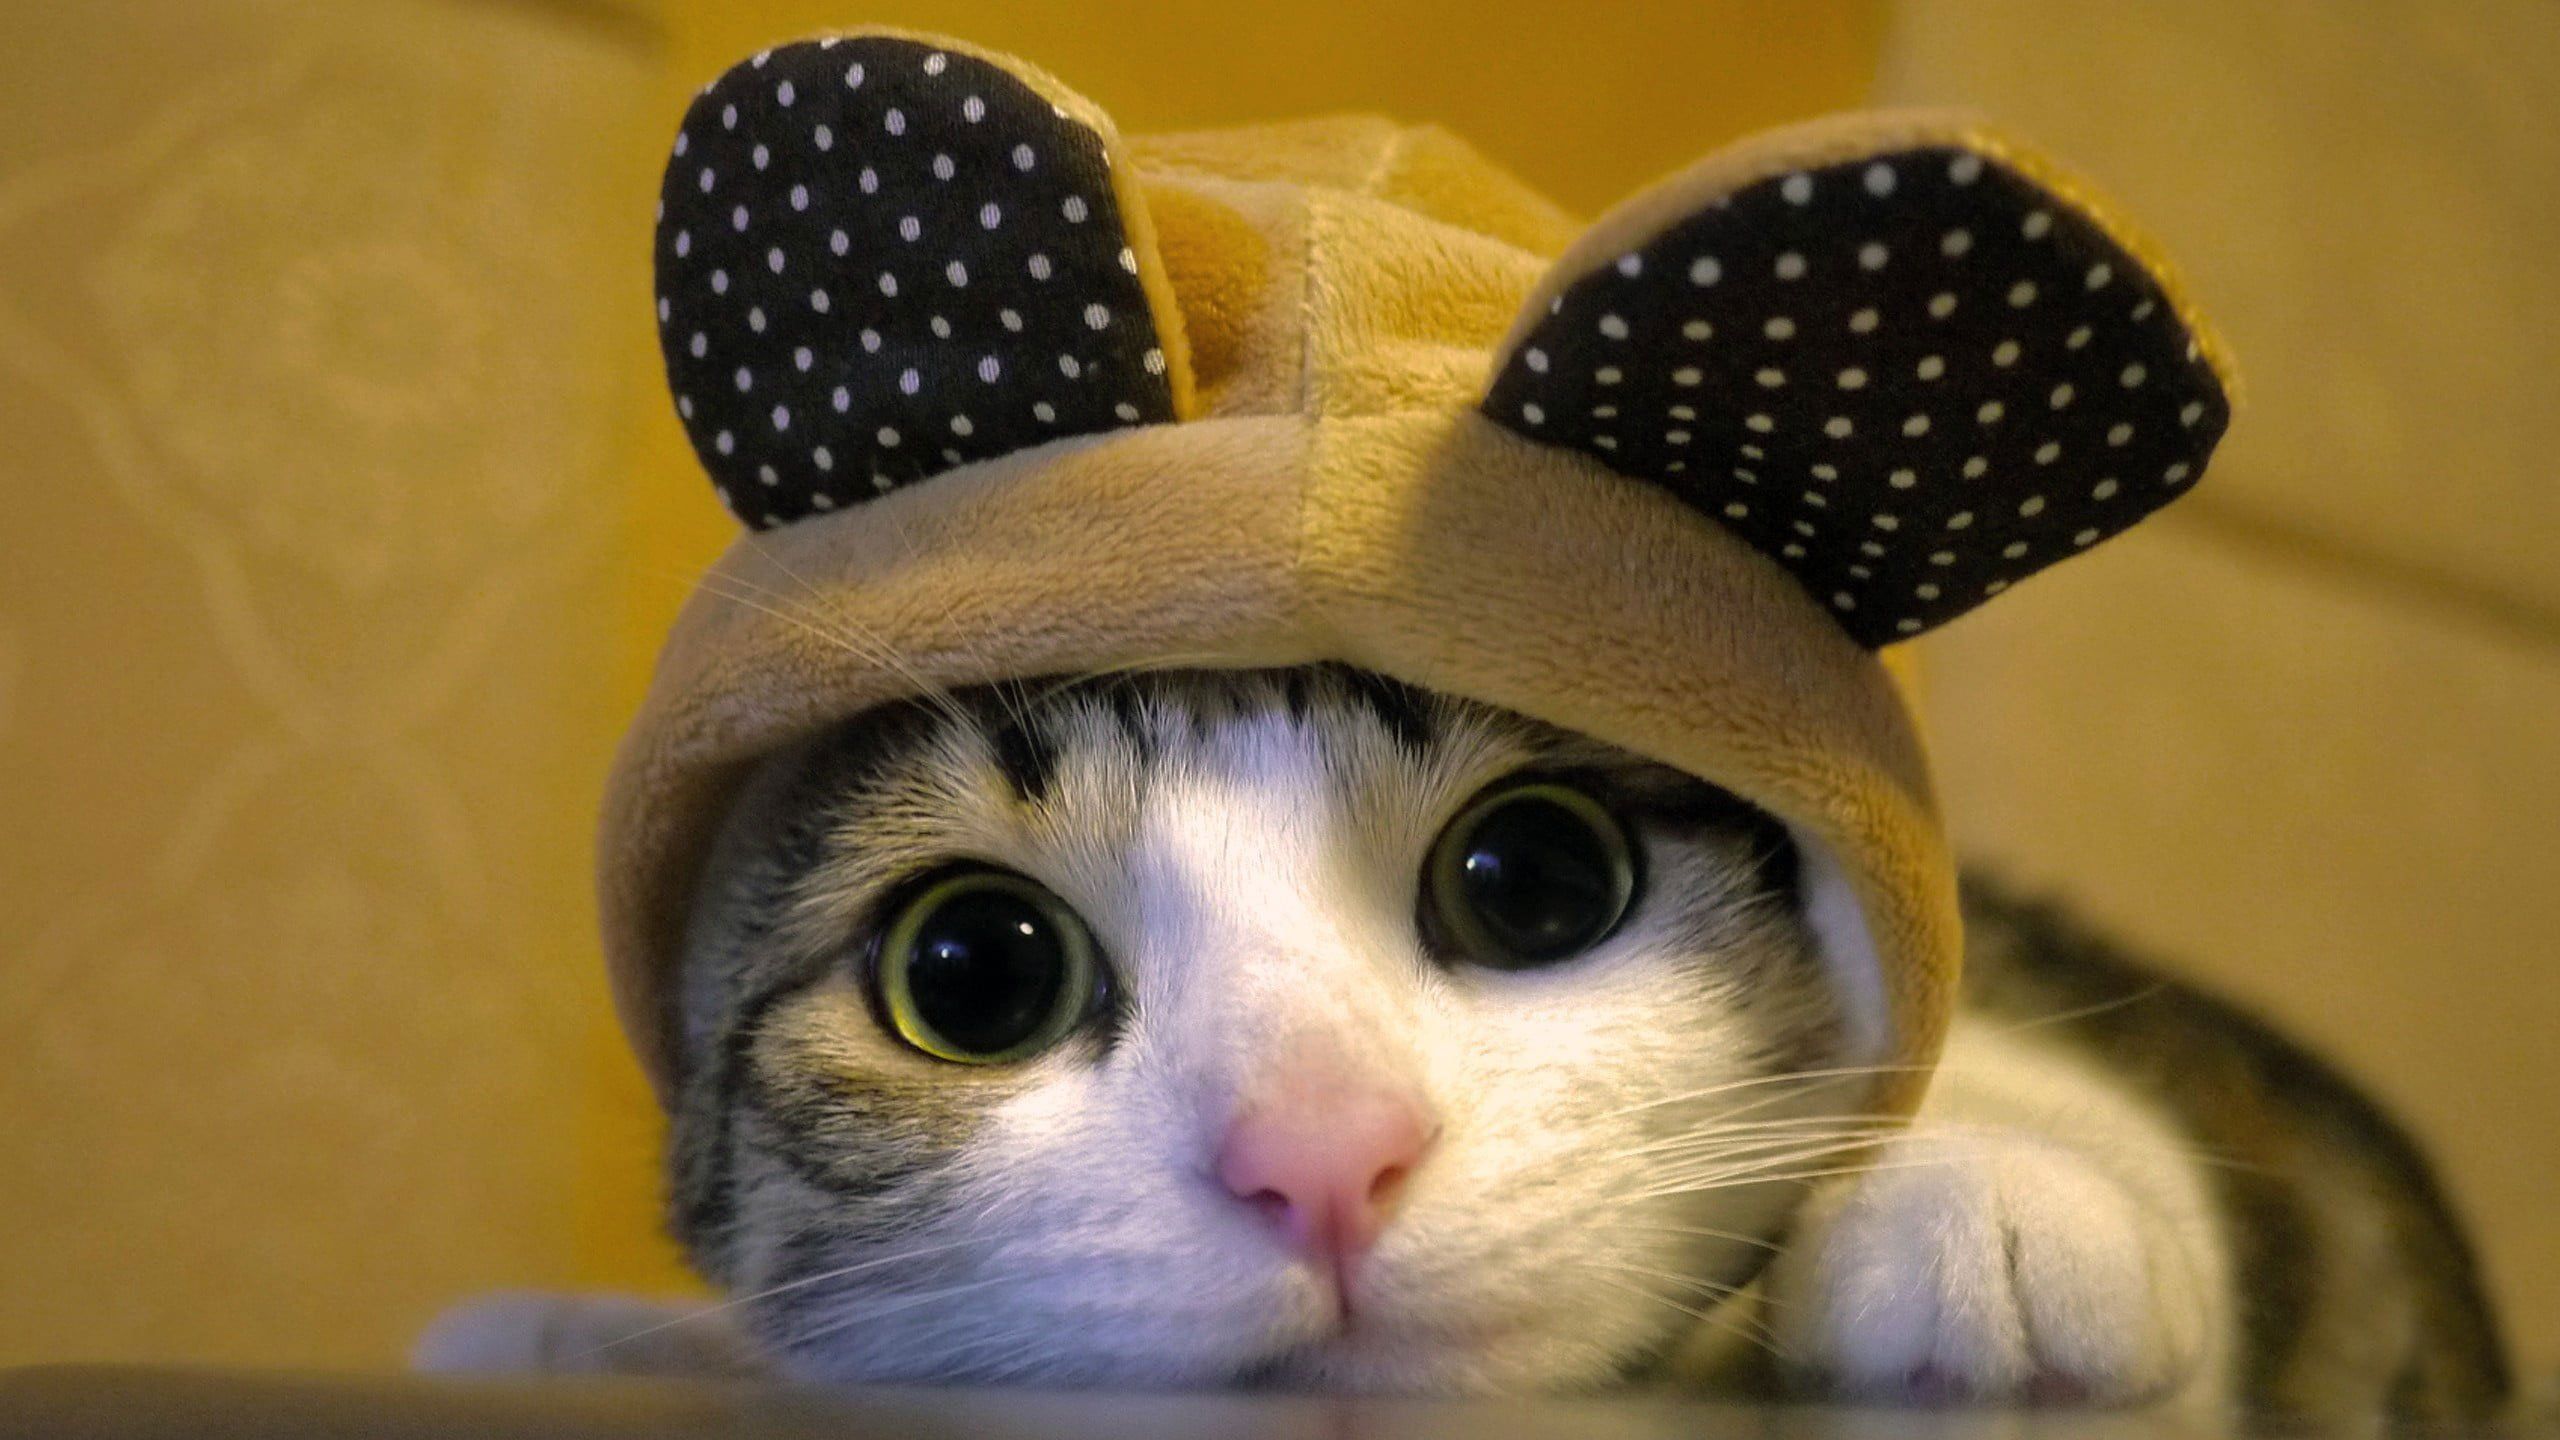 A cat wearing a hat with ears on it - Cat